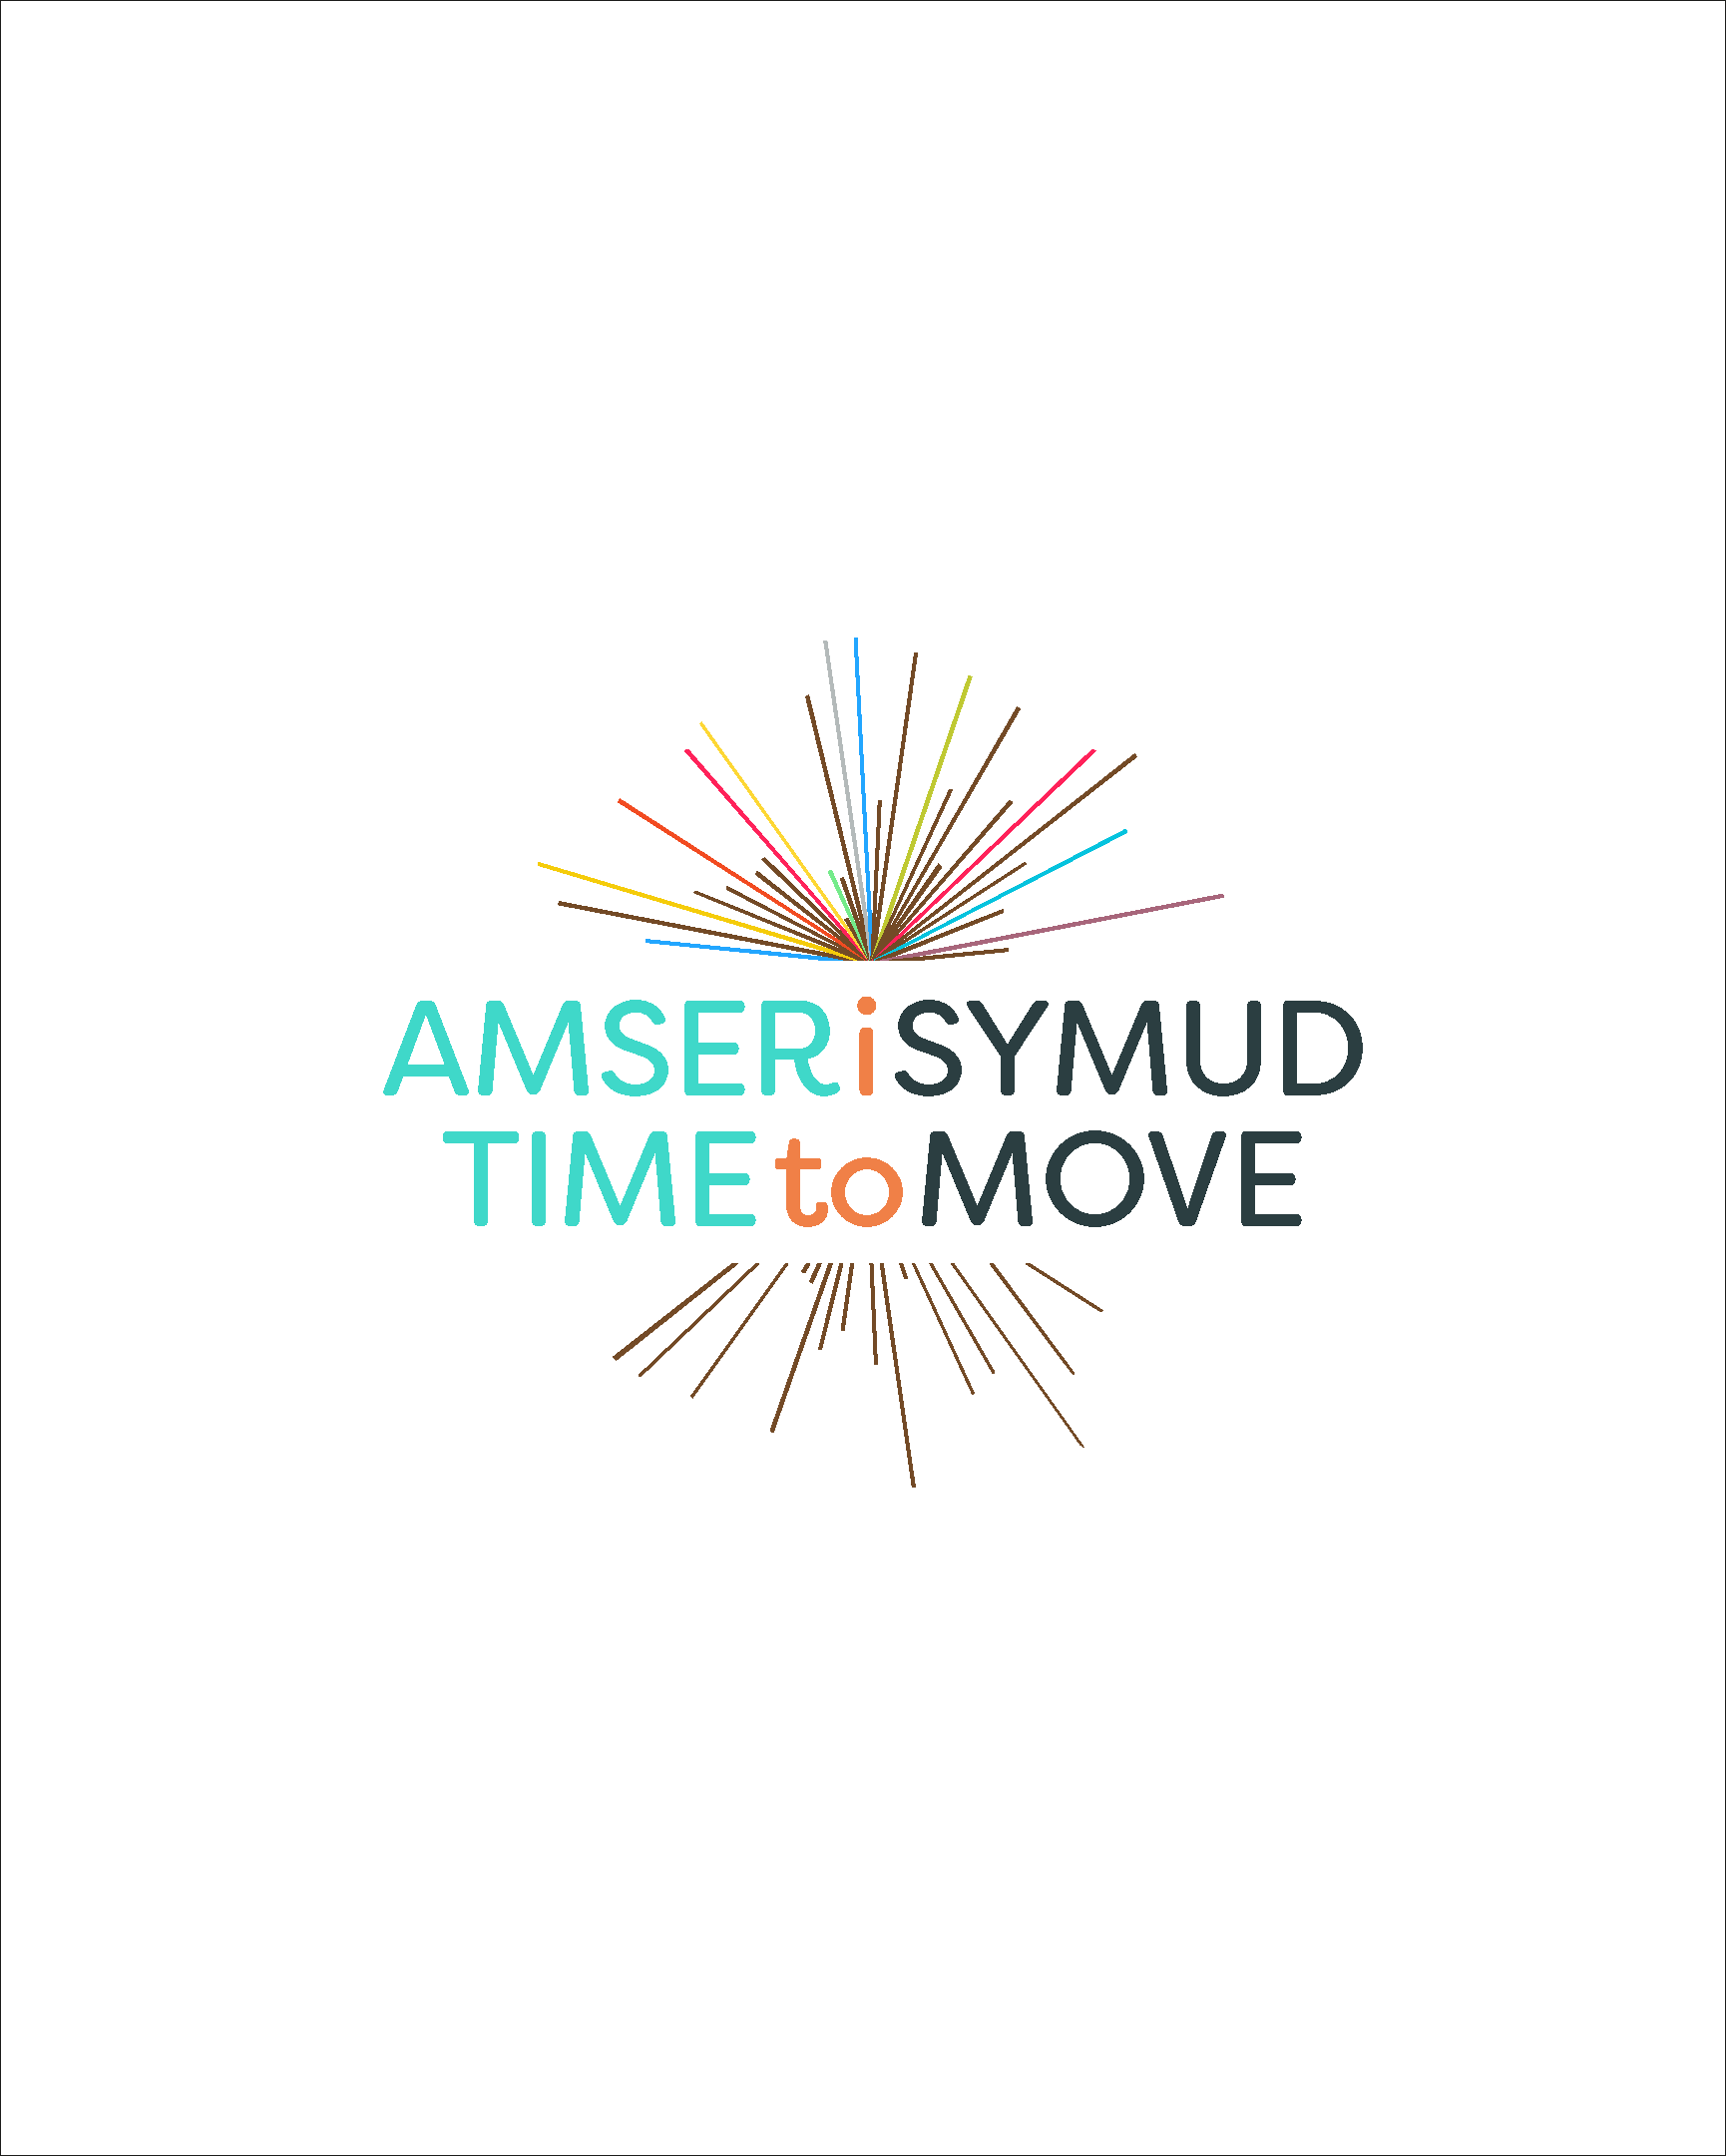 Time to Move employee health and wellbeing logo